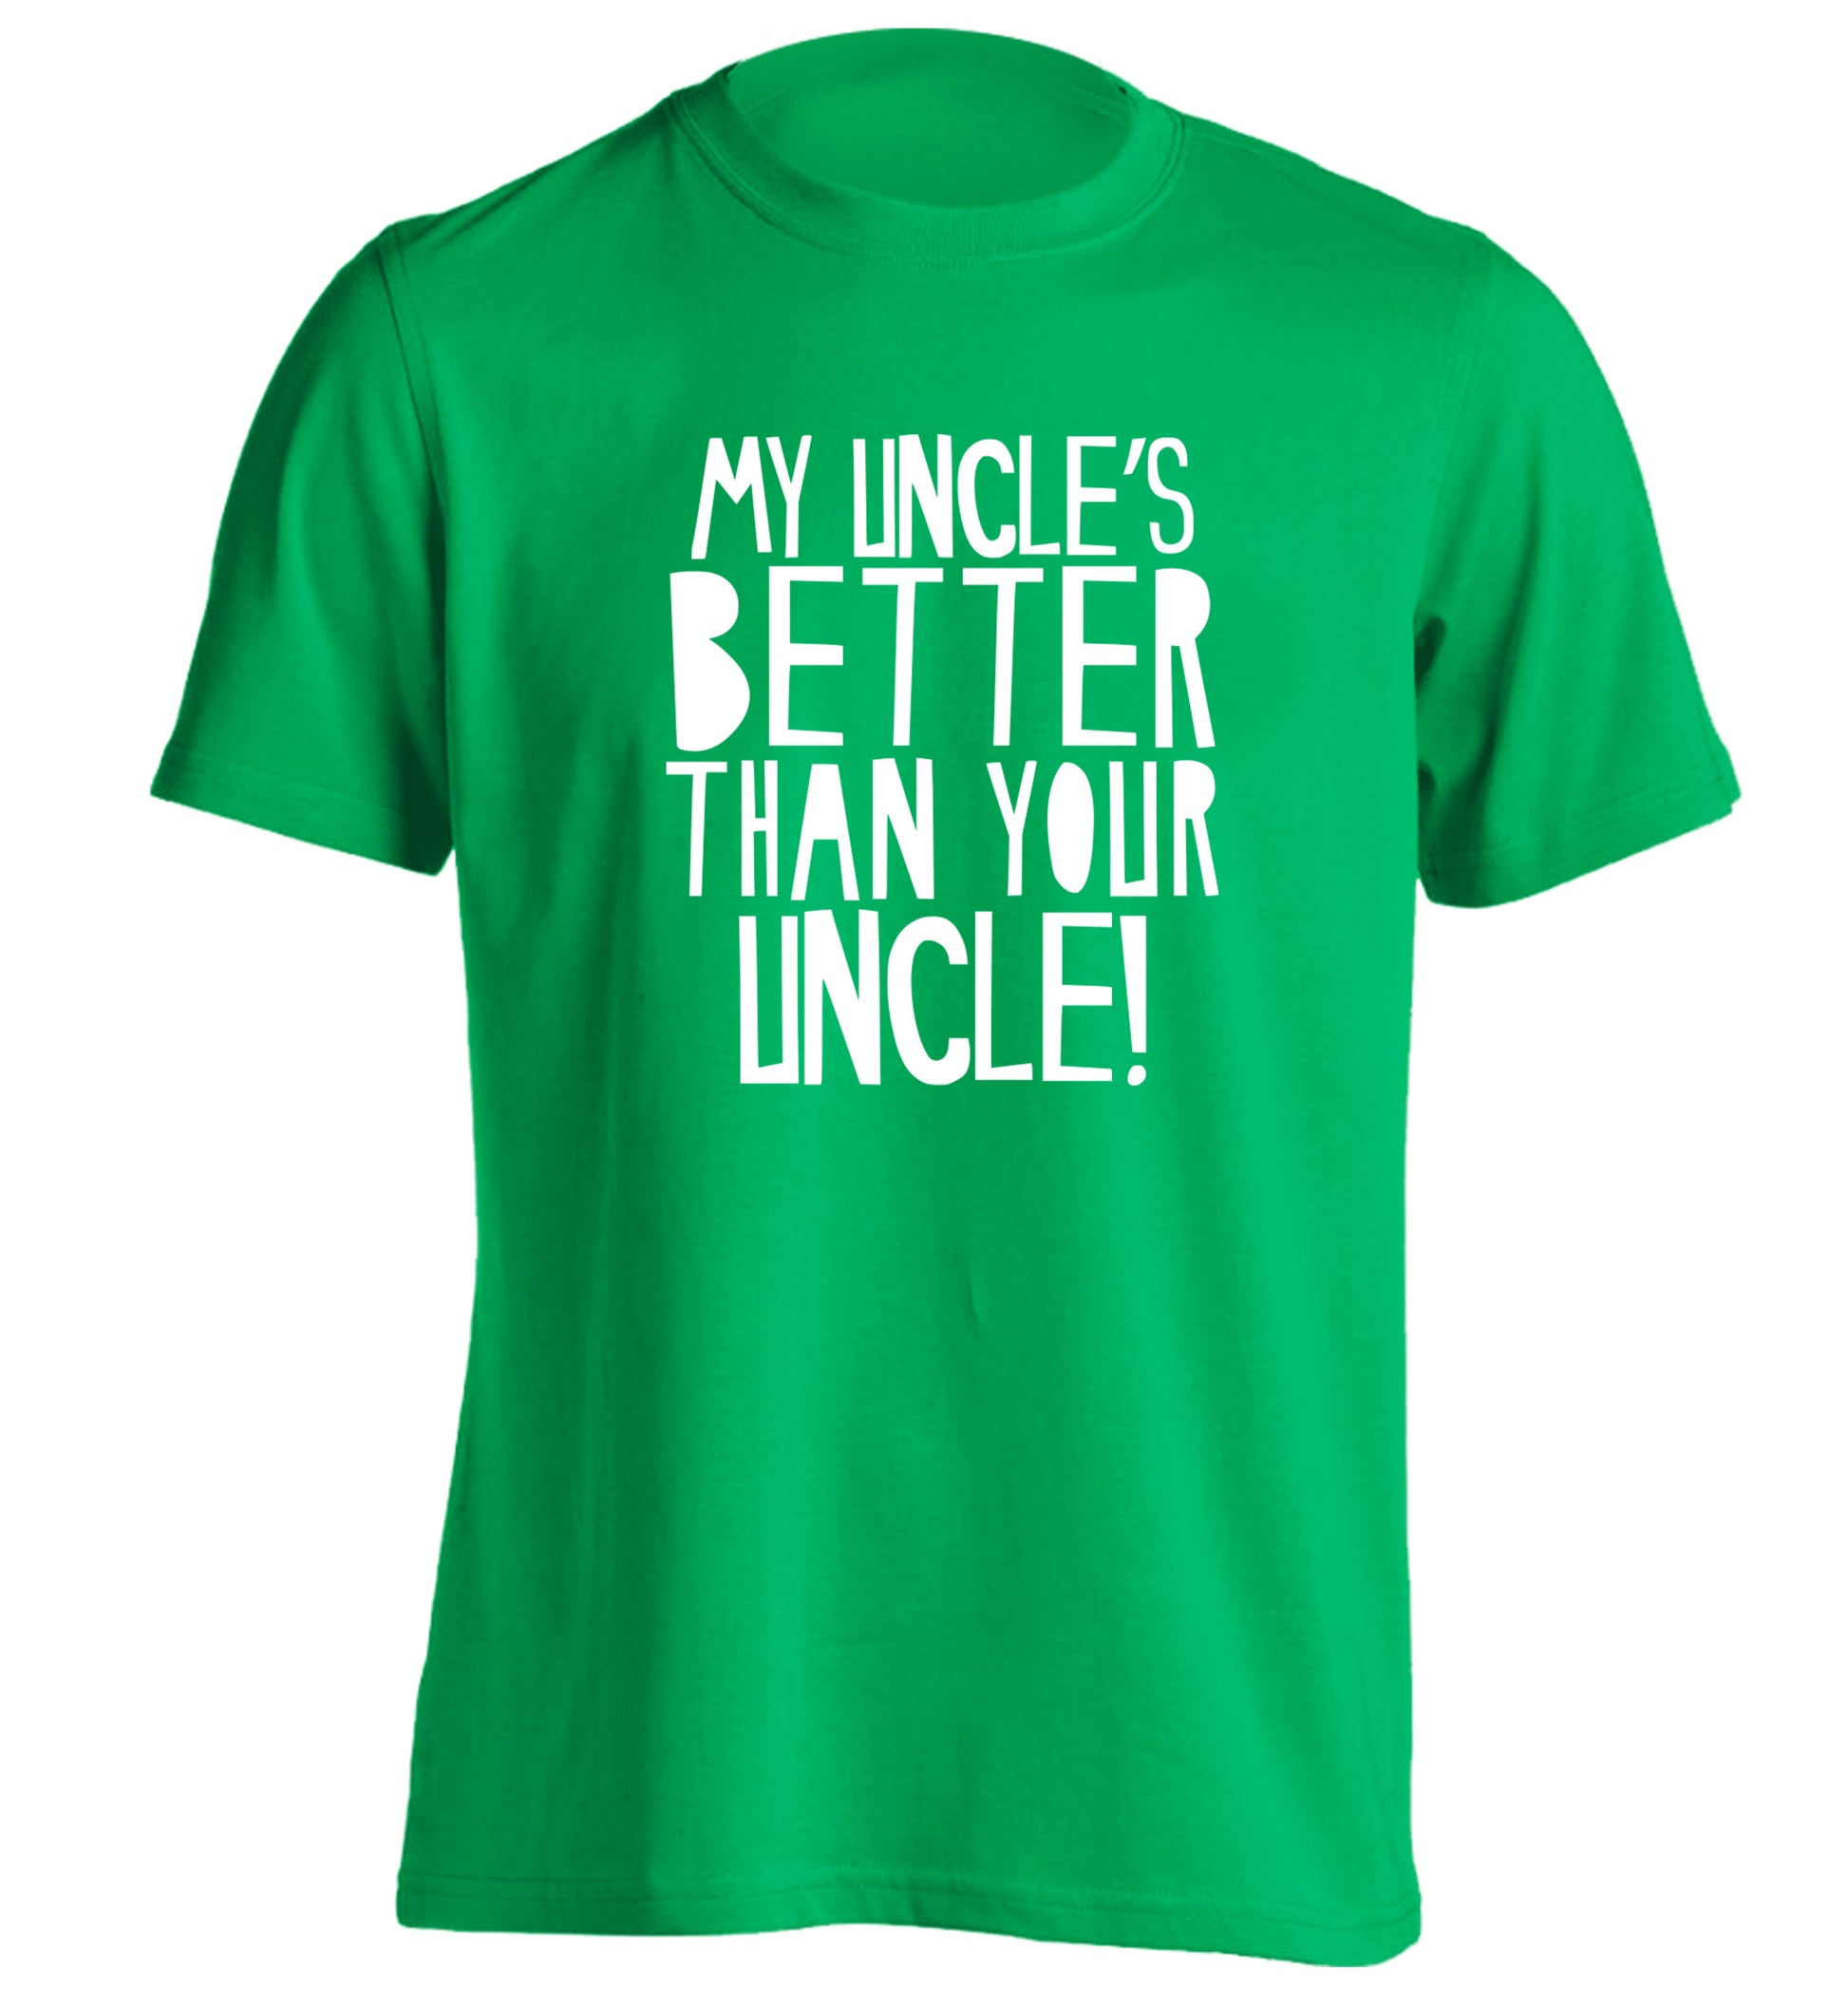 My uncles better than your uncle adults unisex green Tshirt 2XL